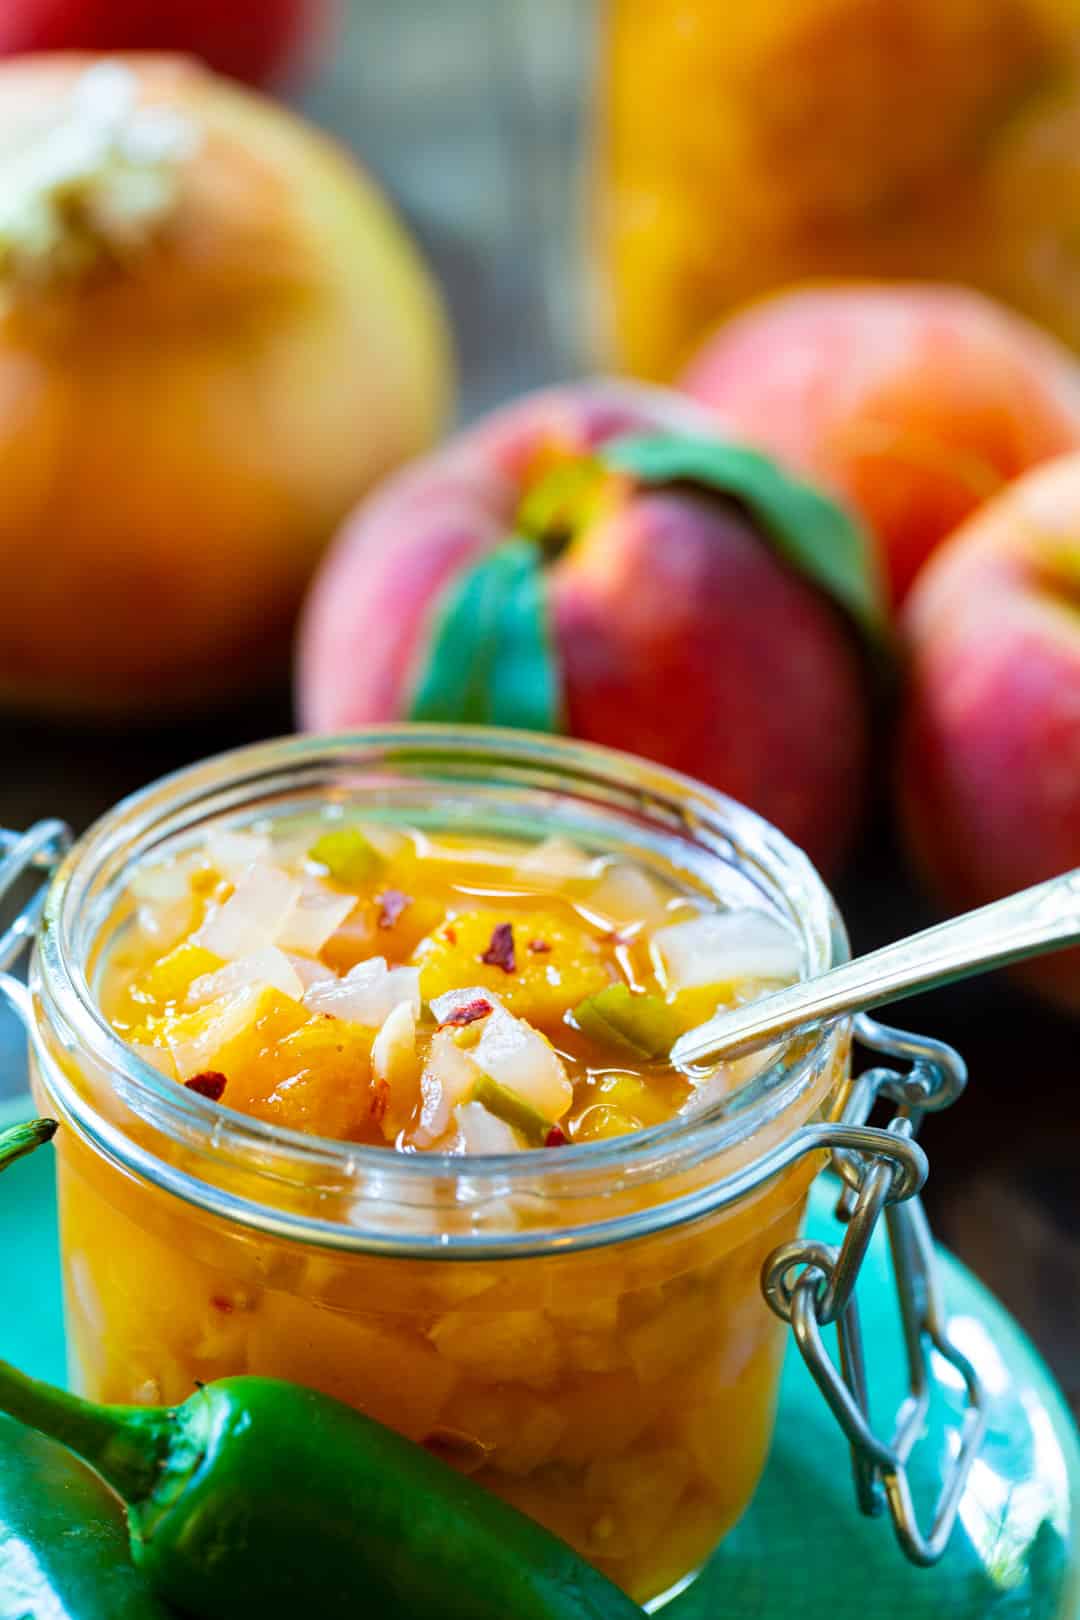 Relish in a glass jar with a spoon stuck in it.